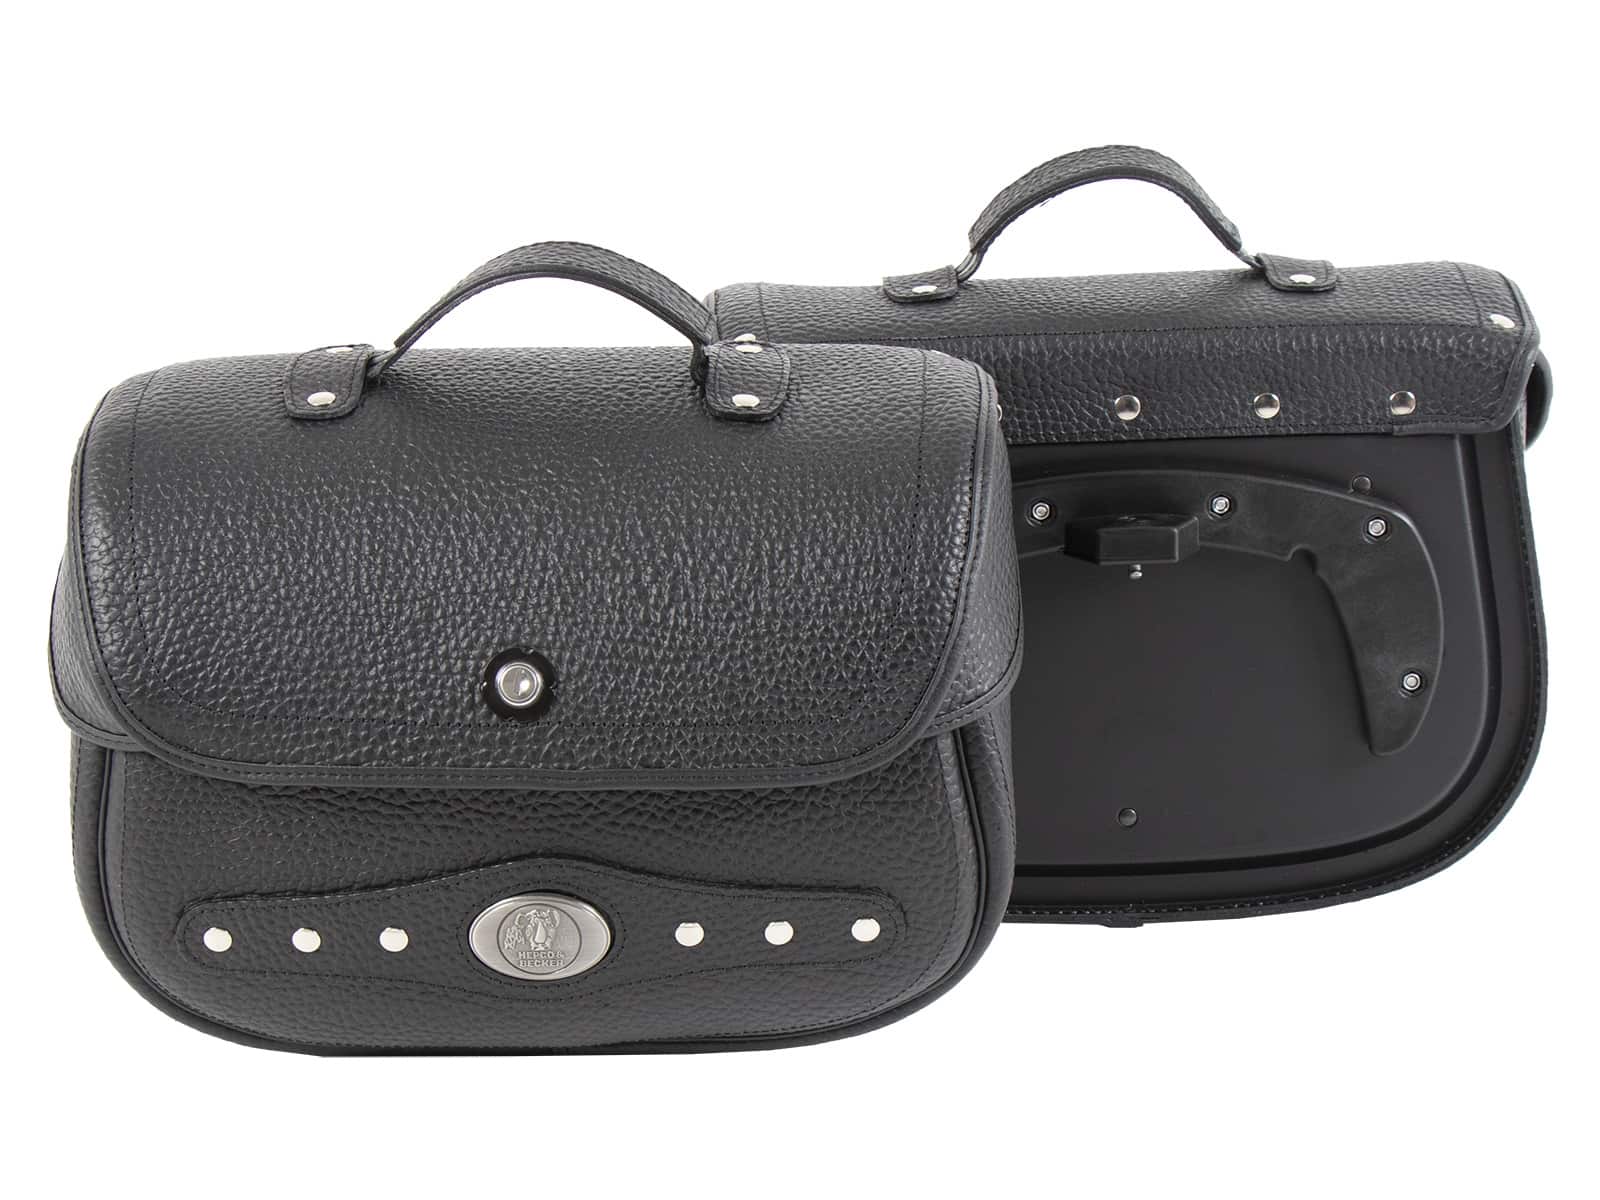 Nevada leather bag set for C-Bow